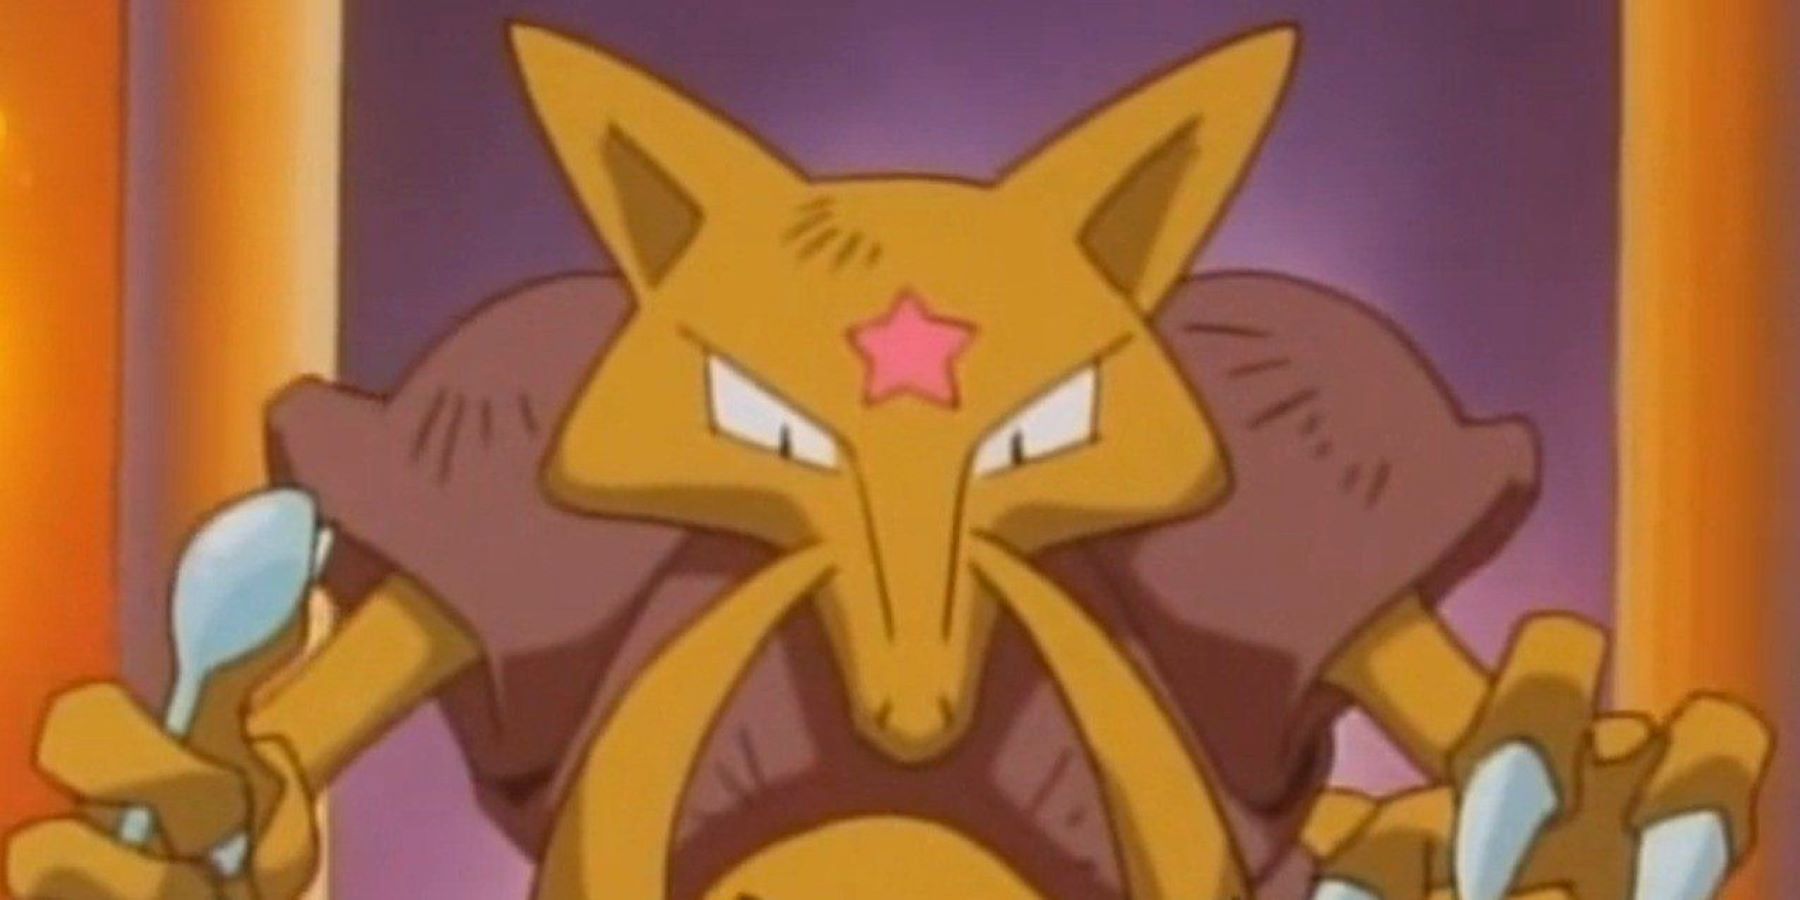 An injured Kadabra holding up a spoon in the Pokemon anime